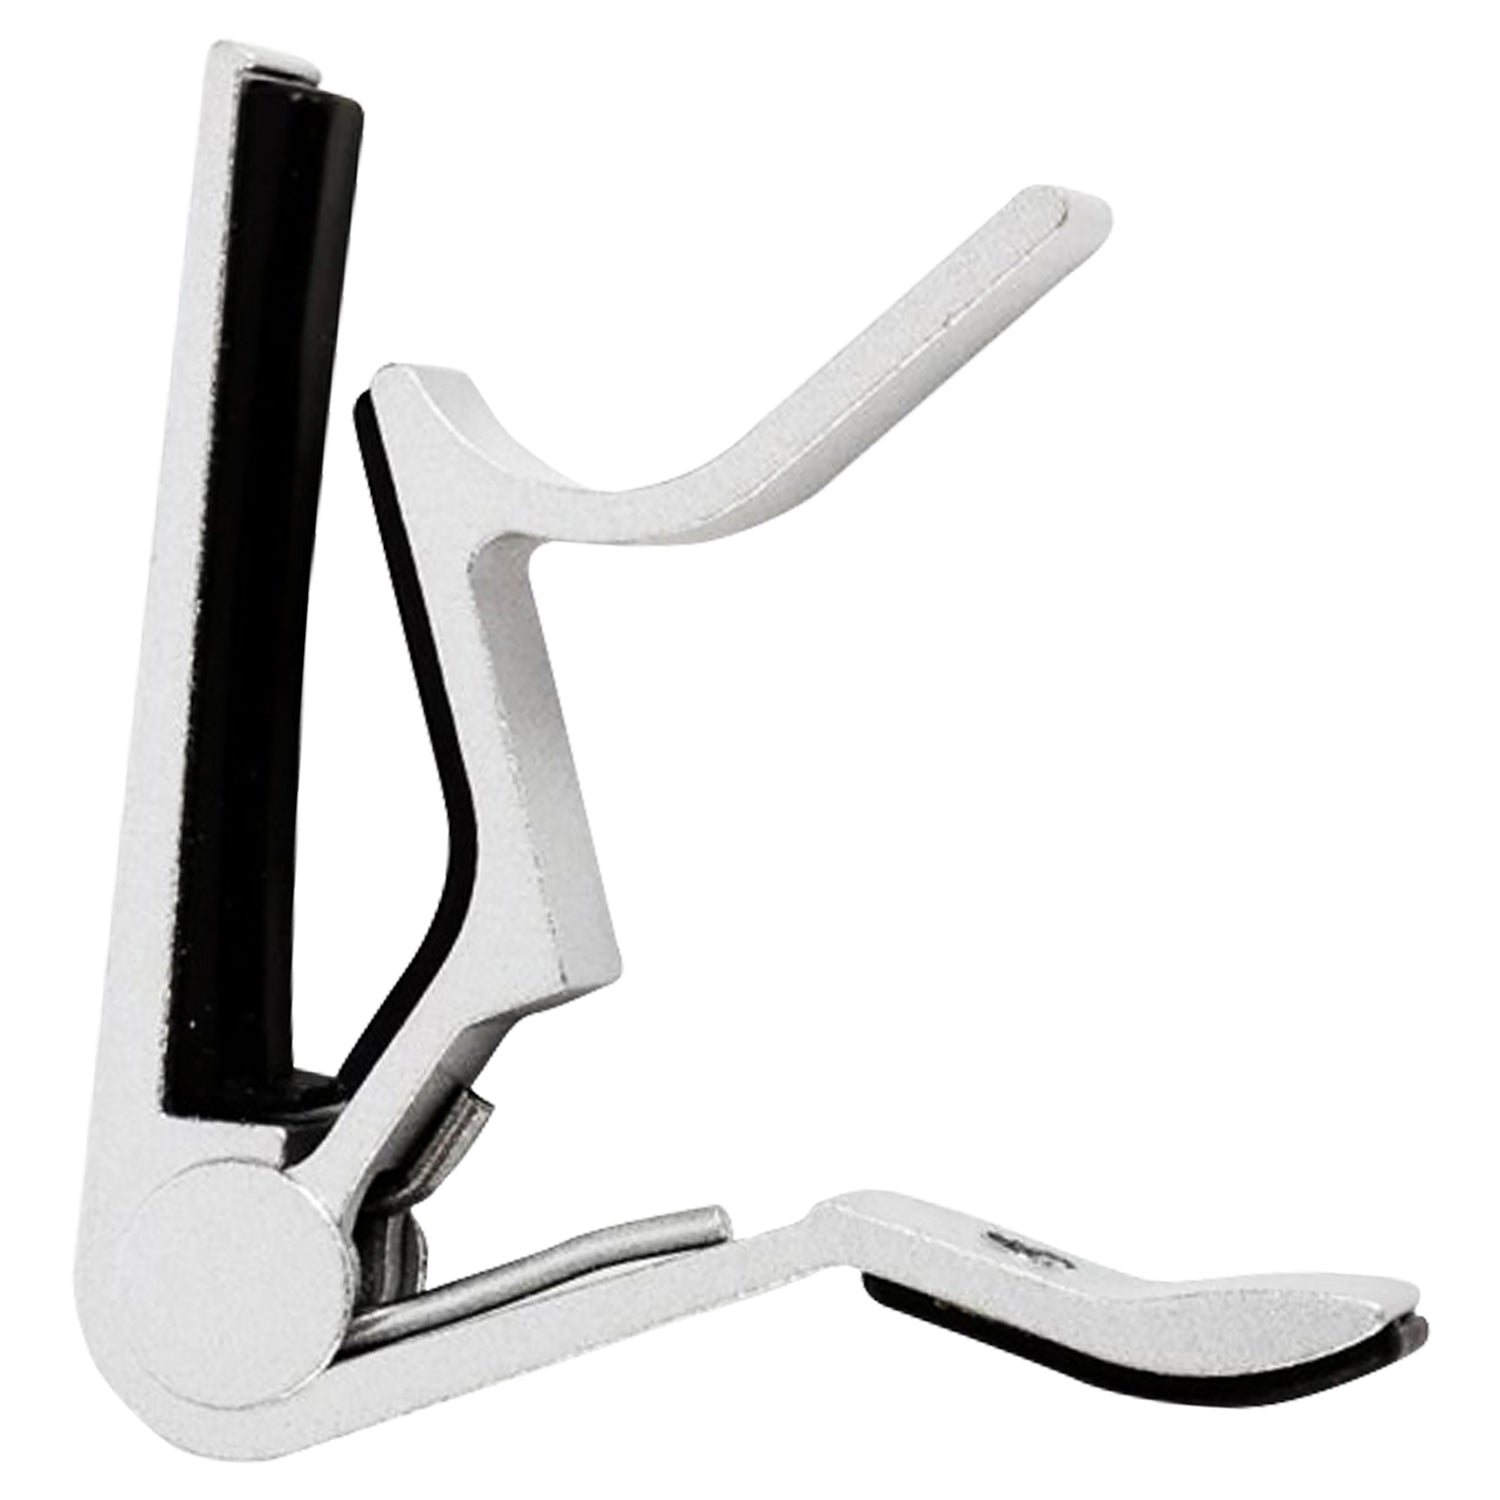 5 Core Guitar Capo 6 String Kapo Universal Clamp w Soft Padding for Acoustic Electric Guitars 1/2 Pc